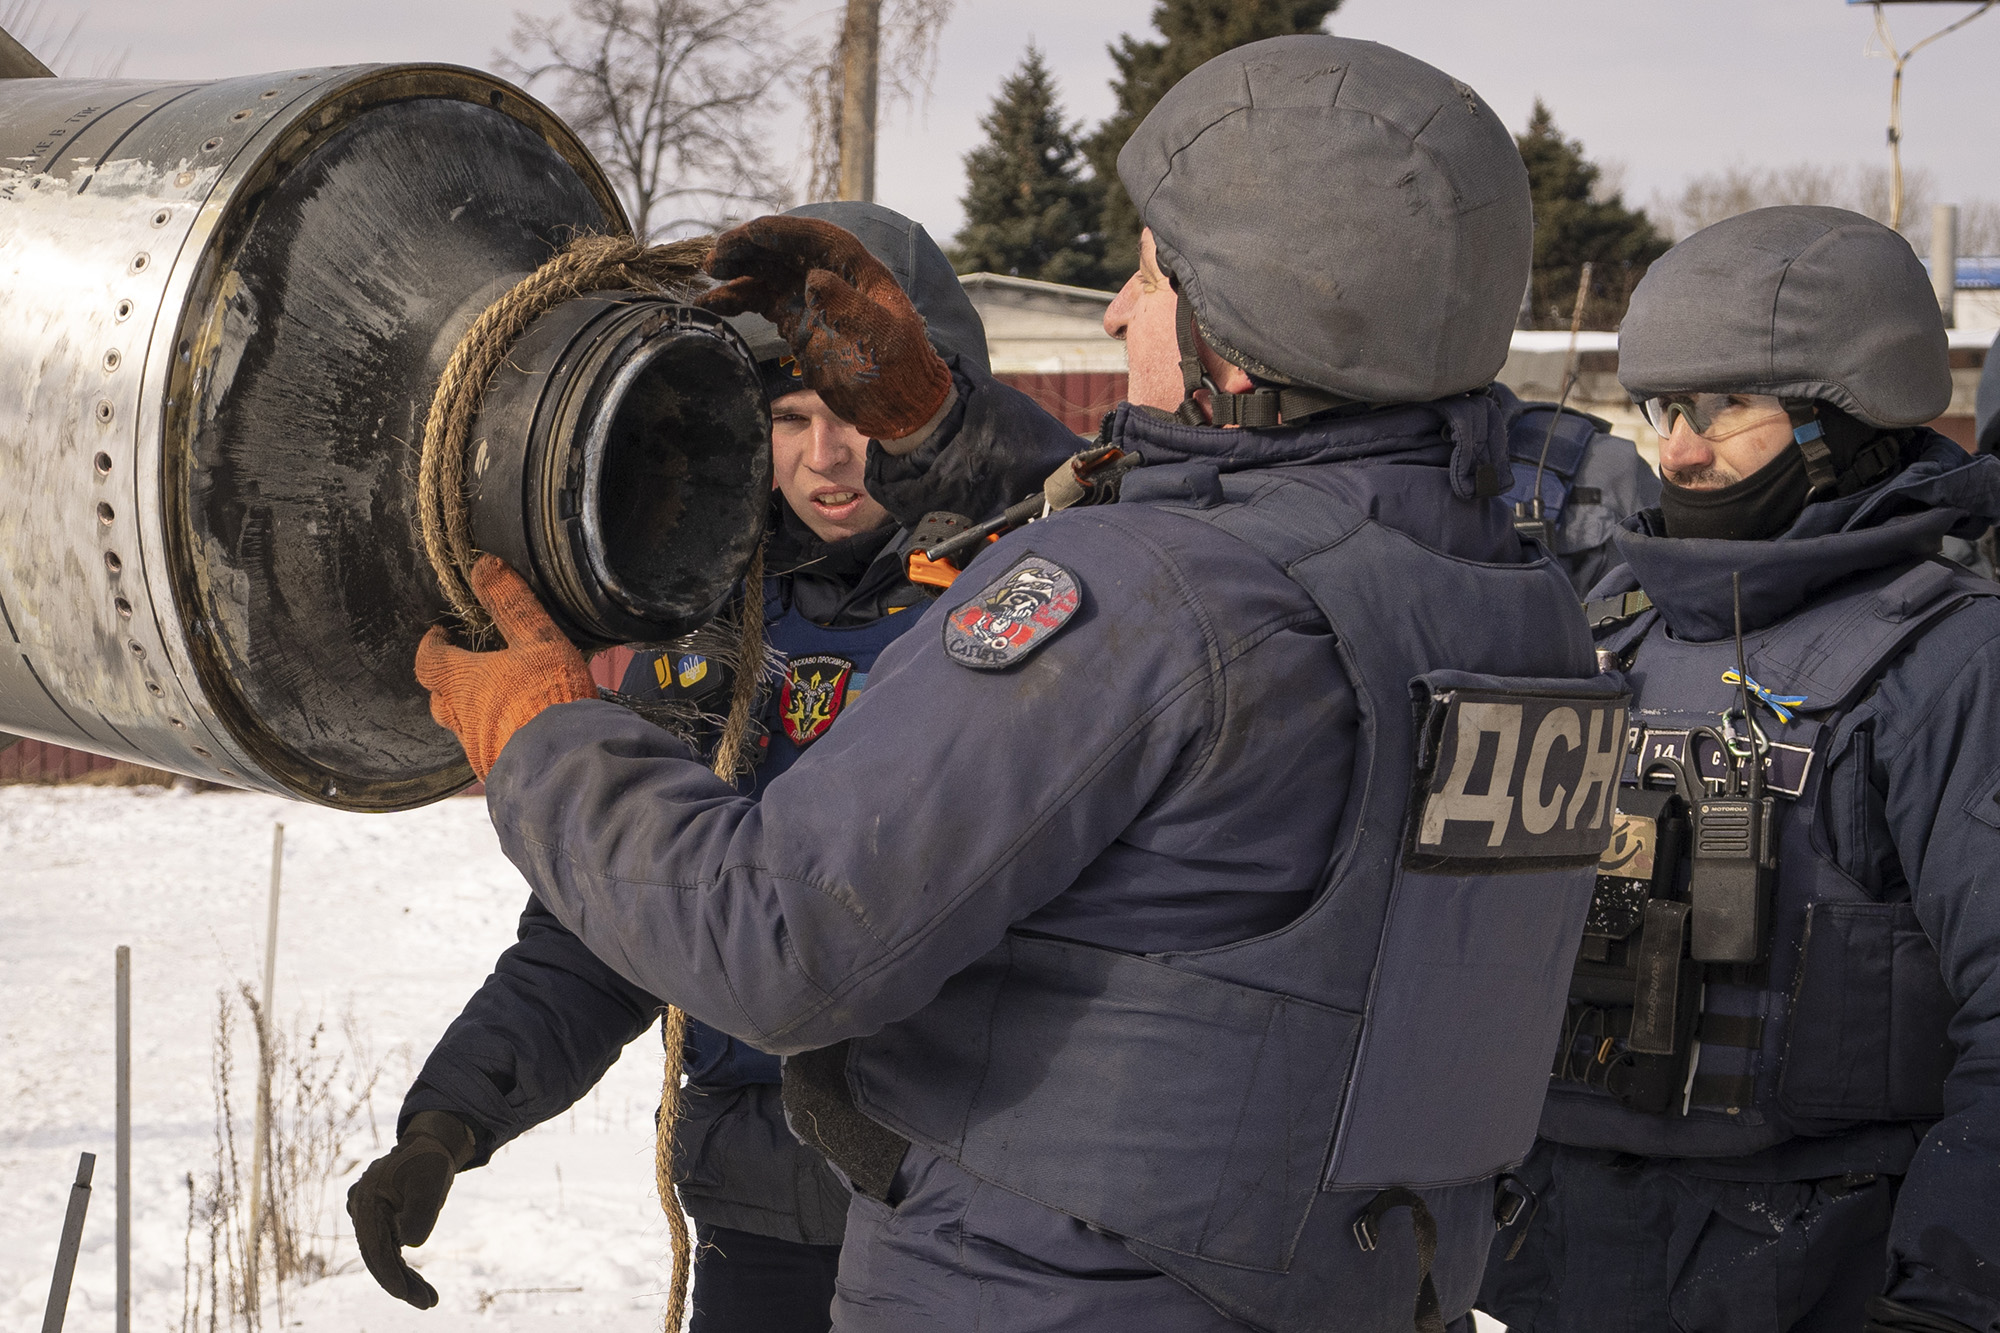 A Ukrainian emergency services employee uses a rope to secure the remains of an S-300 missile fired by Russian forces in Kharkiv, Ukraine, on February 17.